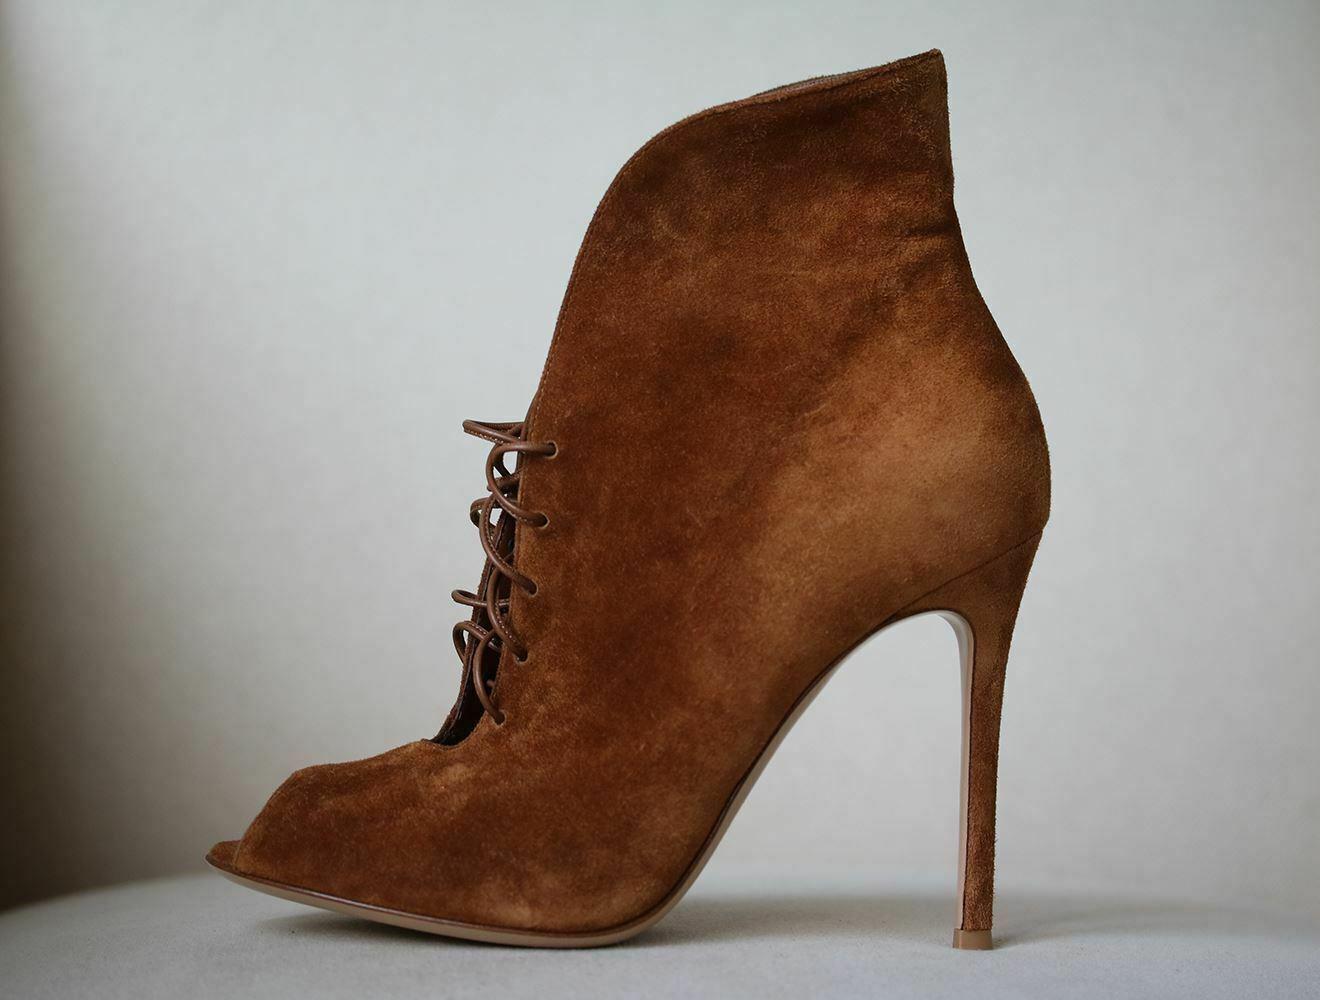 A staple addition to your footwear collection, these Jane boots from Gianvito Rossi give a nod to the label’s signature style. Crafted with a suede upper and stiletto heel. This peep-toe pair features a plunging vamp and wrap-around laces. Heel